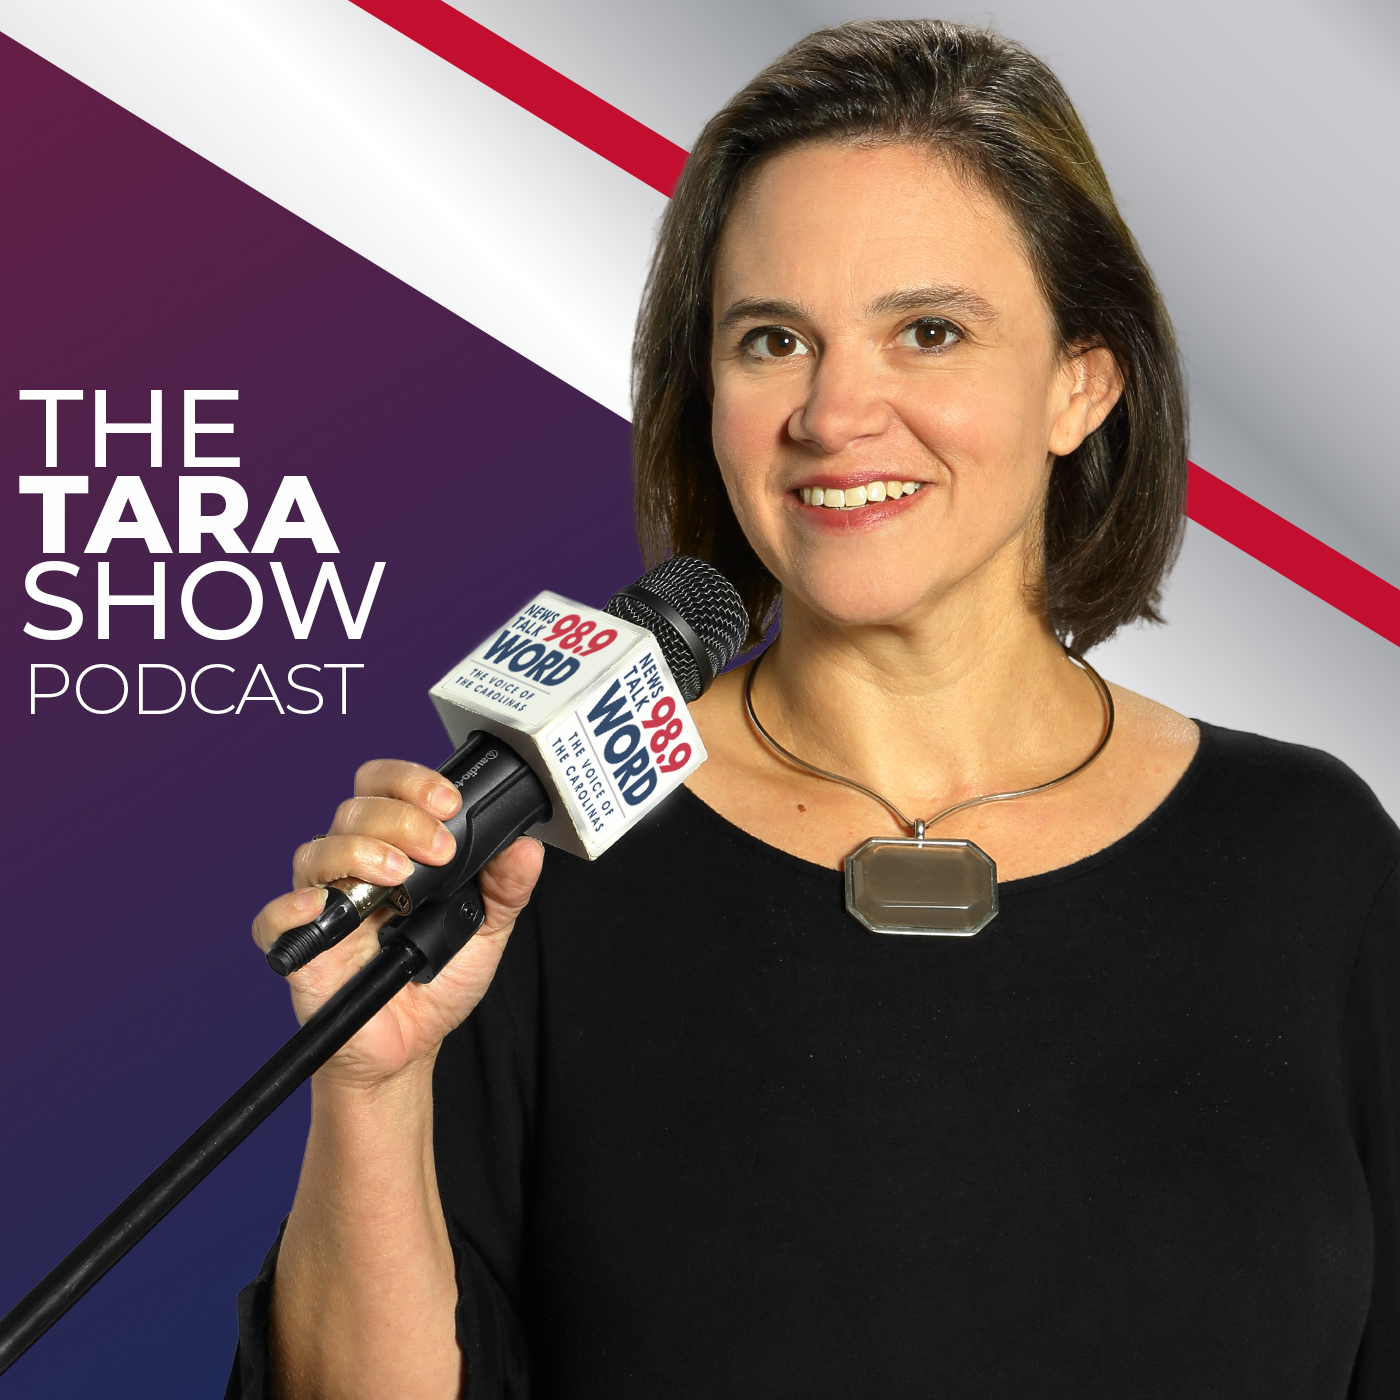 Hour 4: The Tara Show - “Biden Now Close to Death” “The Plan for Biden and the Democrat Party” “The Failure of the Secret Service” “Watching the Narrative” 